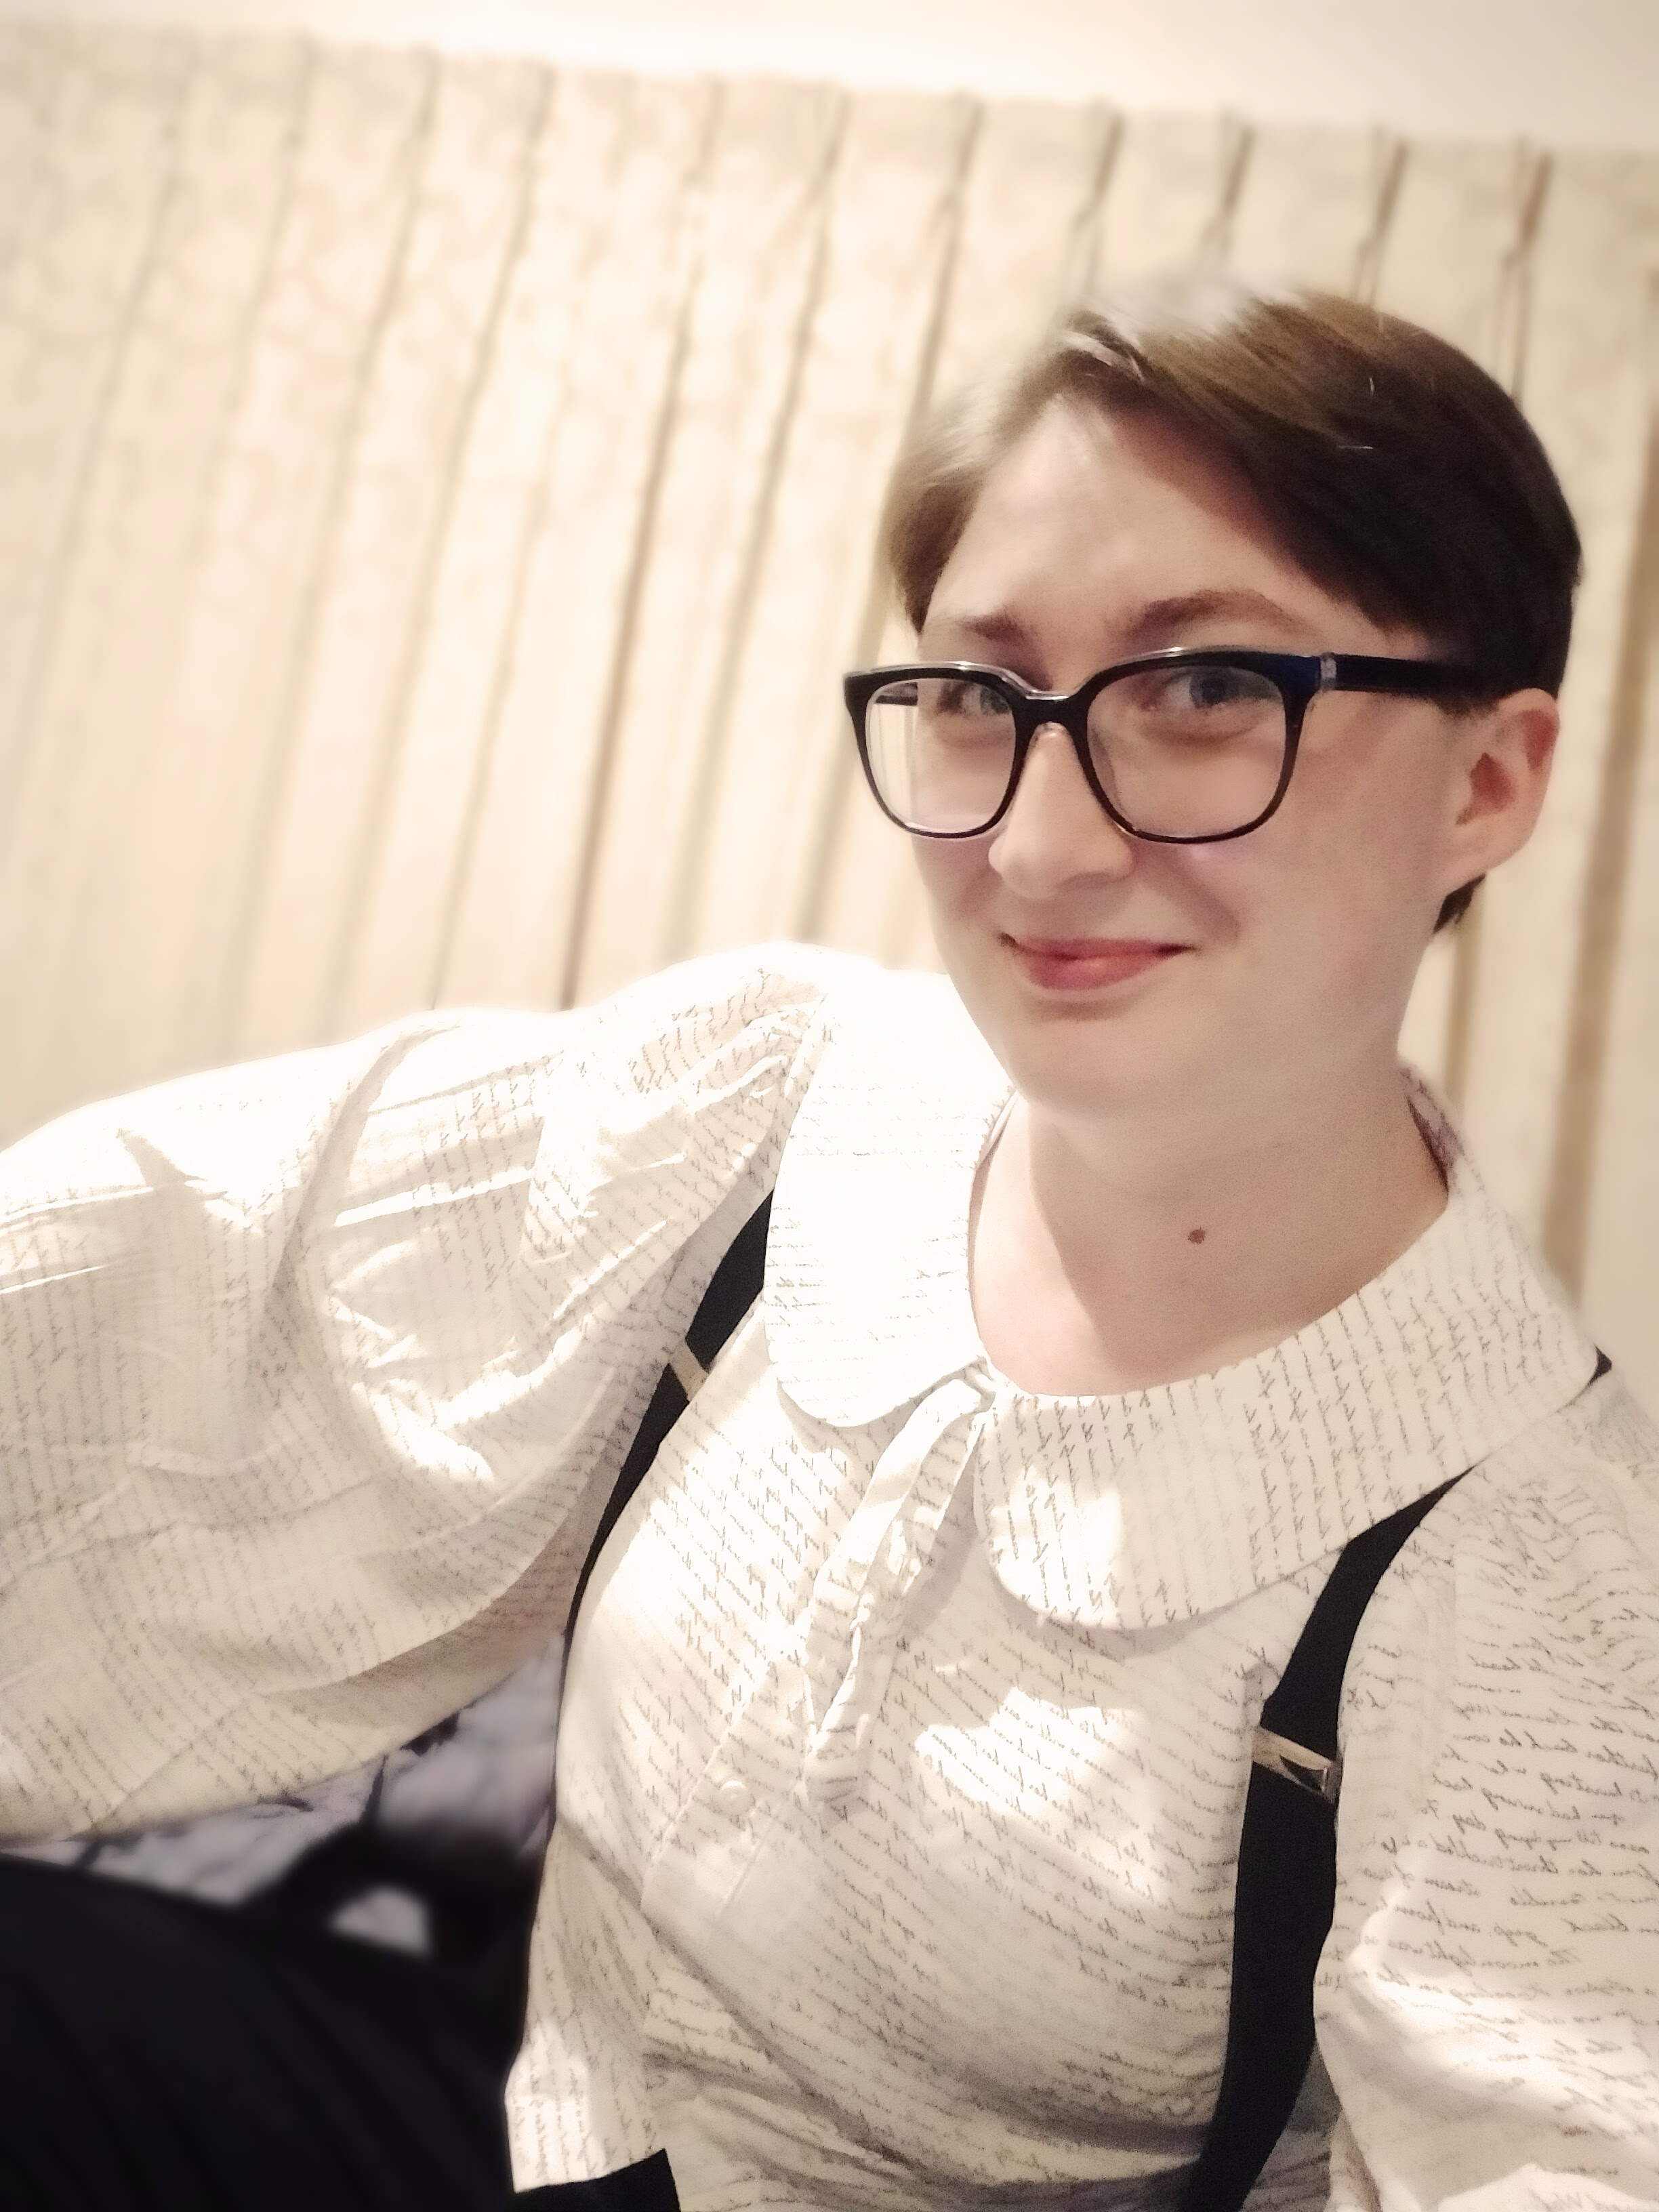 An androgynous person with short brown hair and fair skin smiling at the camera; they are wearing thick-rimmed glasses, a white, balloon-sleeved shirt, black suspenders, and black trousers.